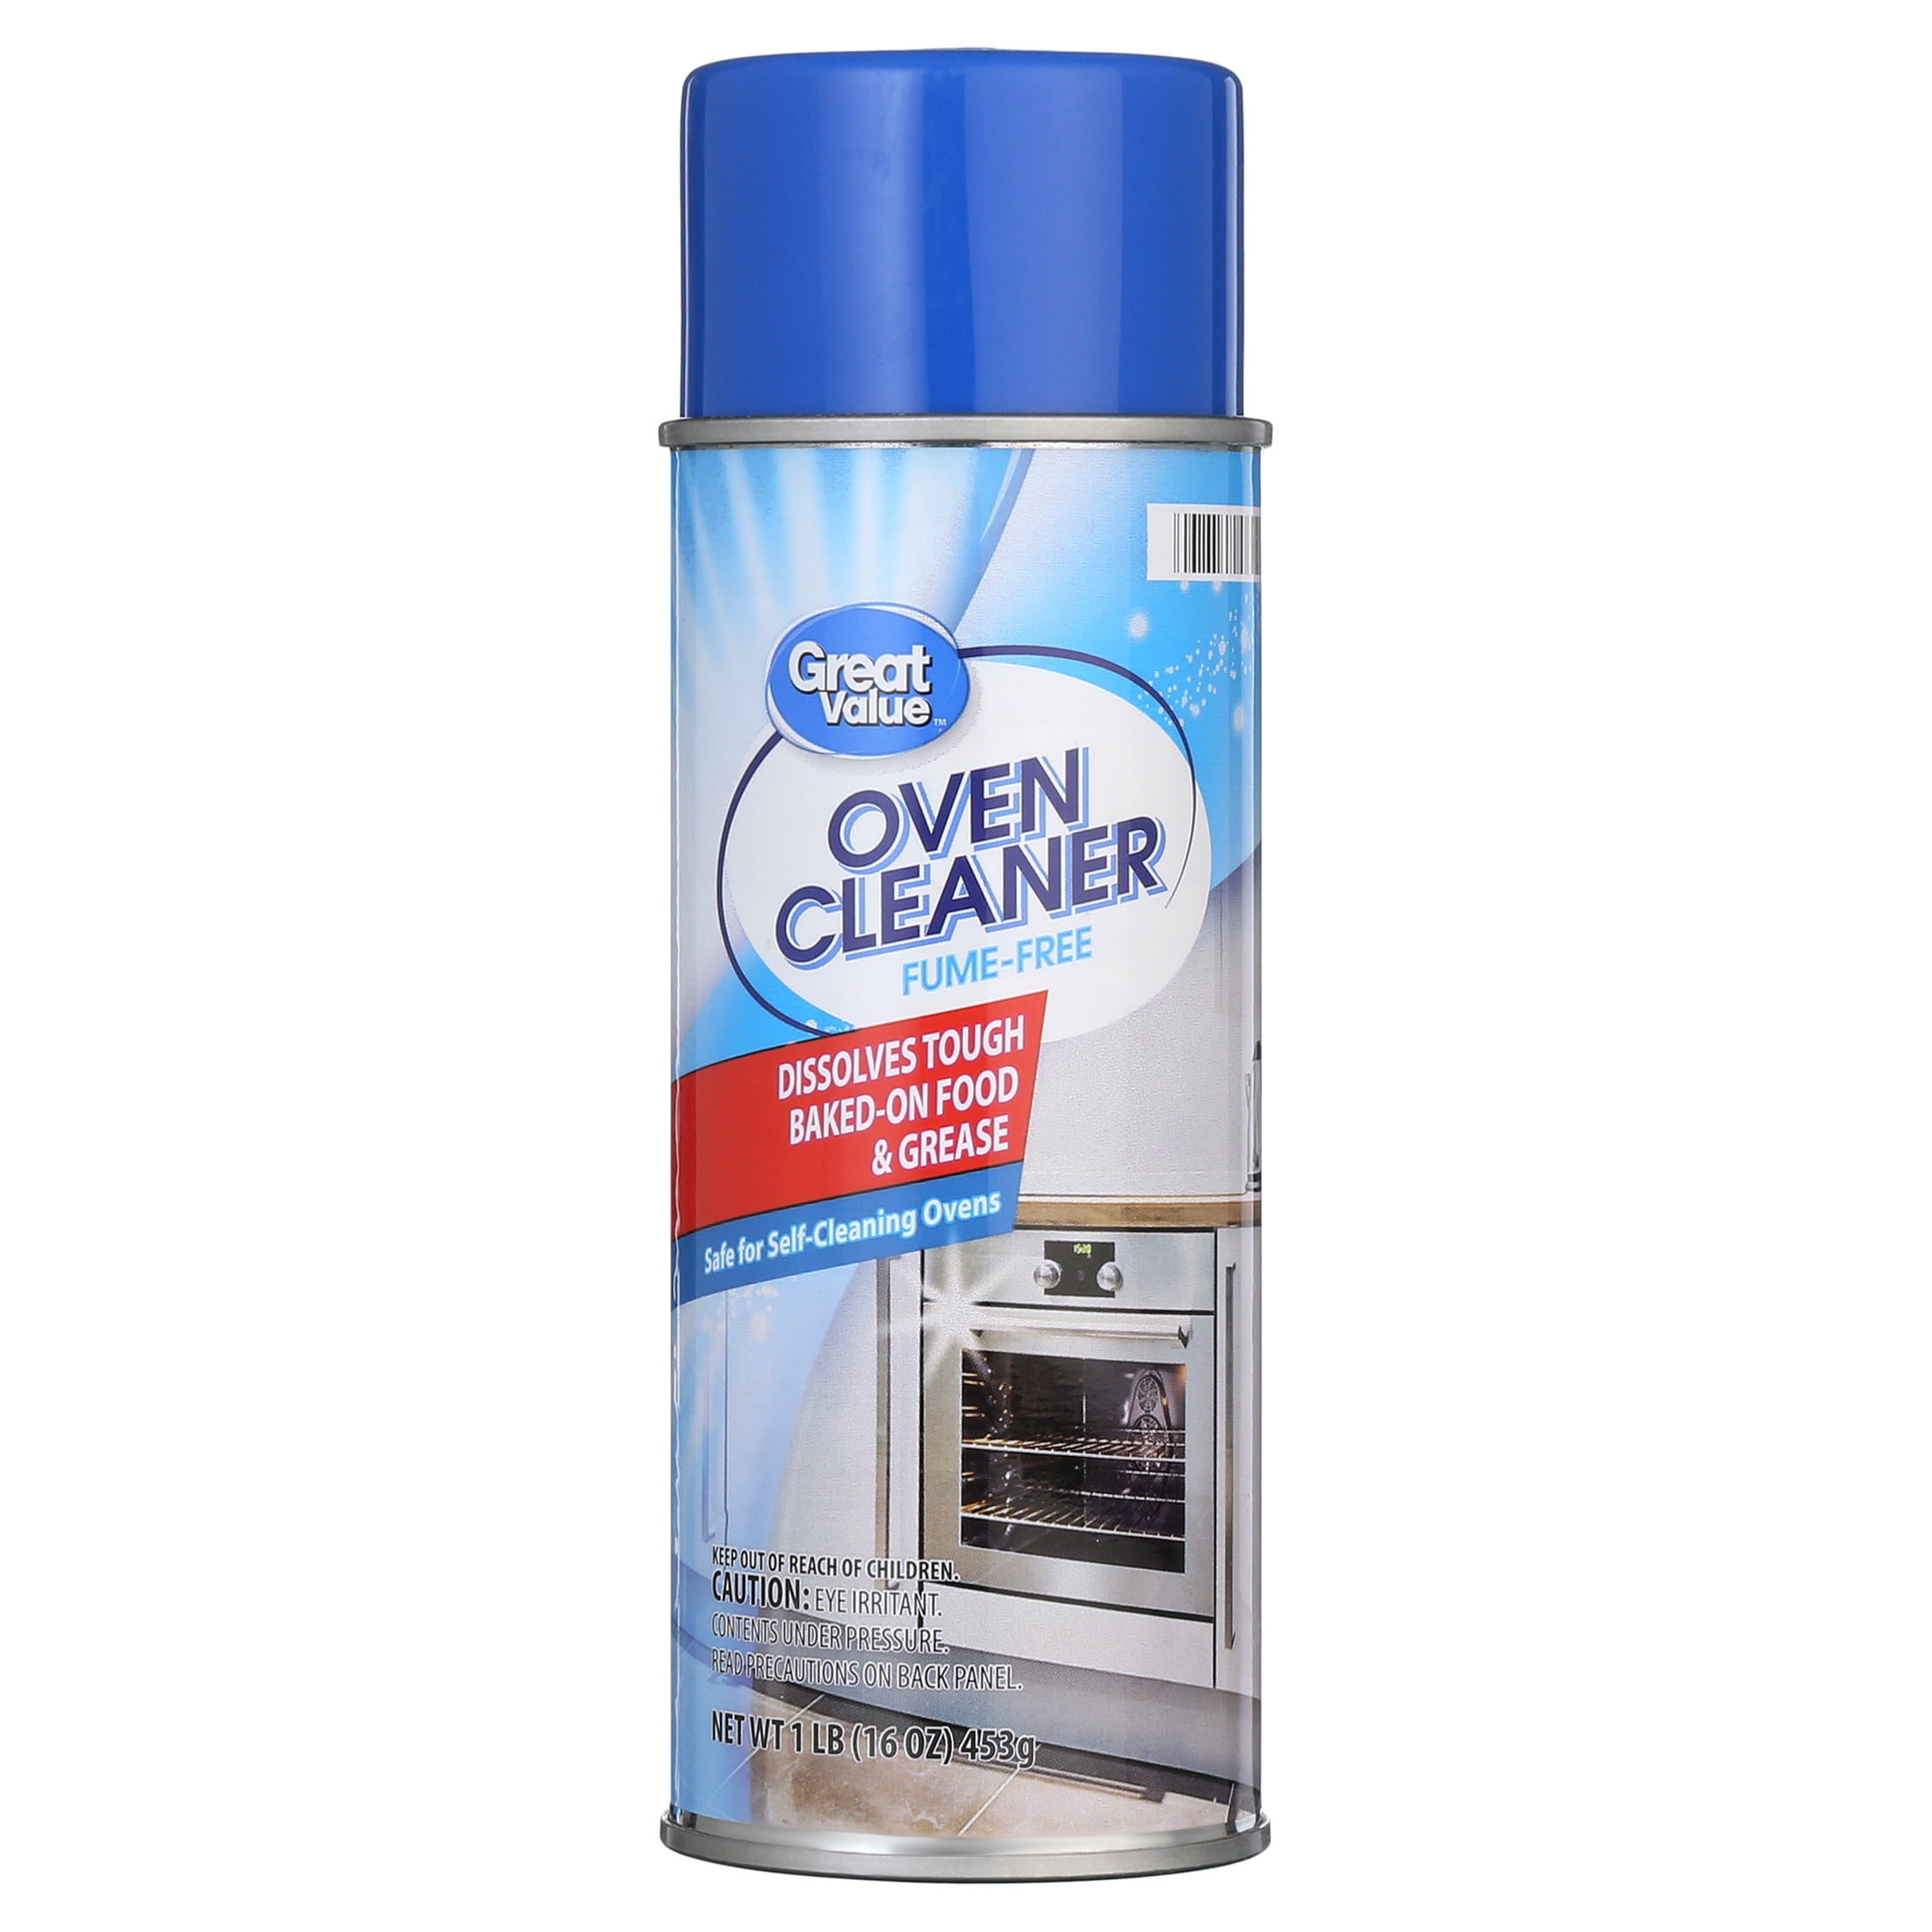 Great Value Fume Free Oven Cleaner, 16 oz